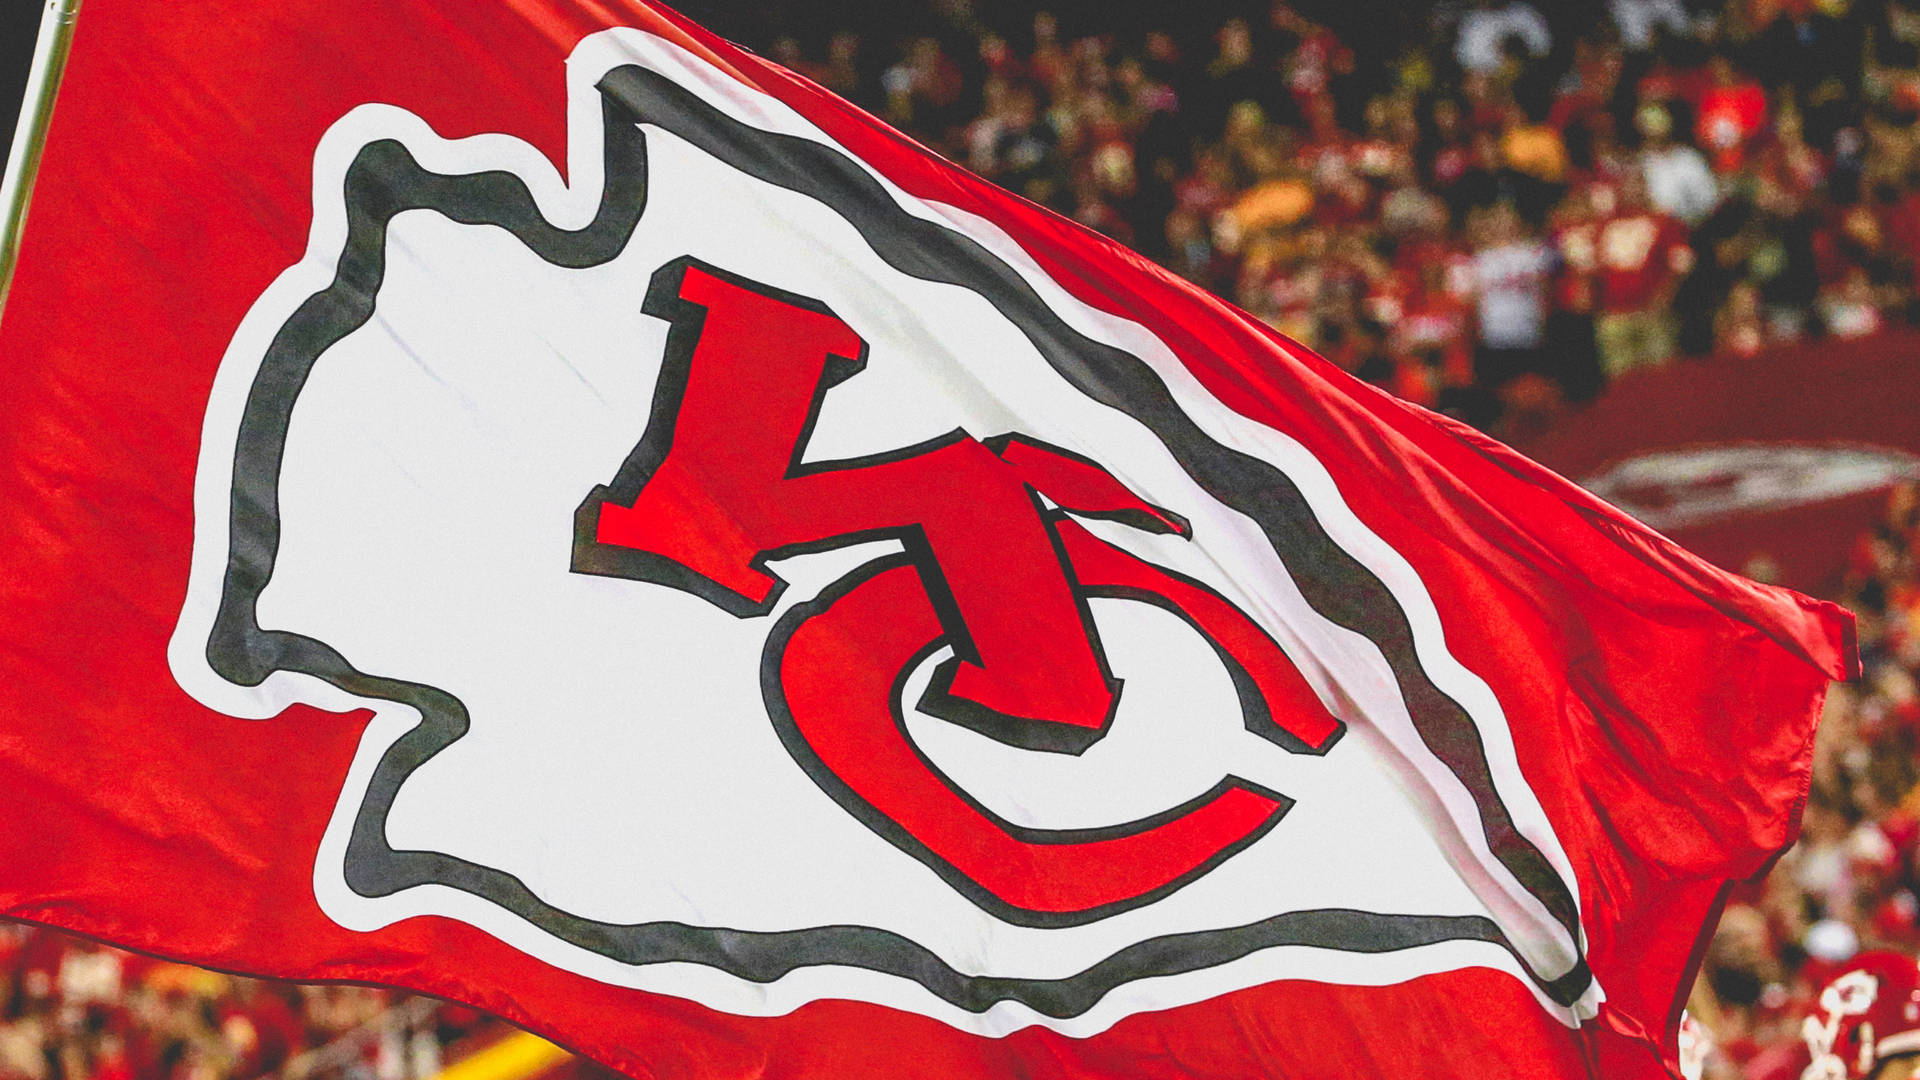 2560X1440 Chiefs Wallpaper and Background